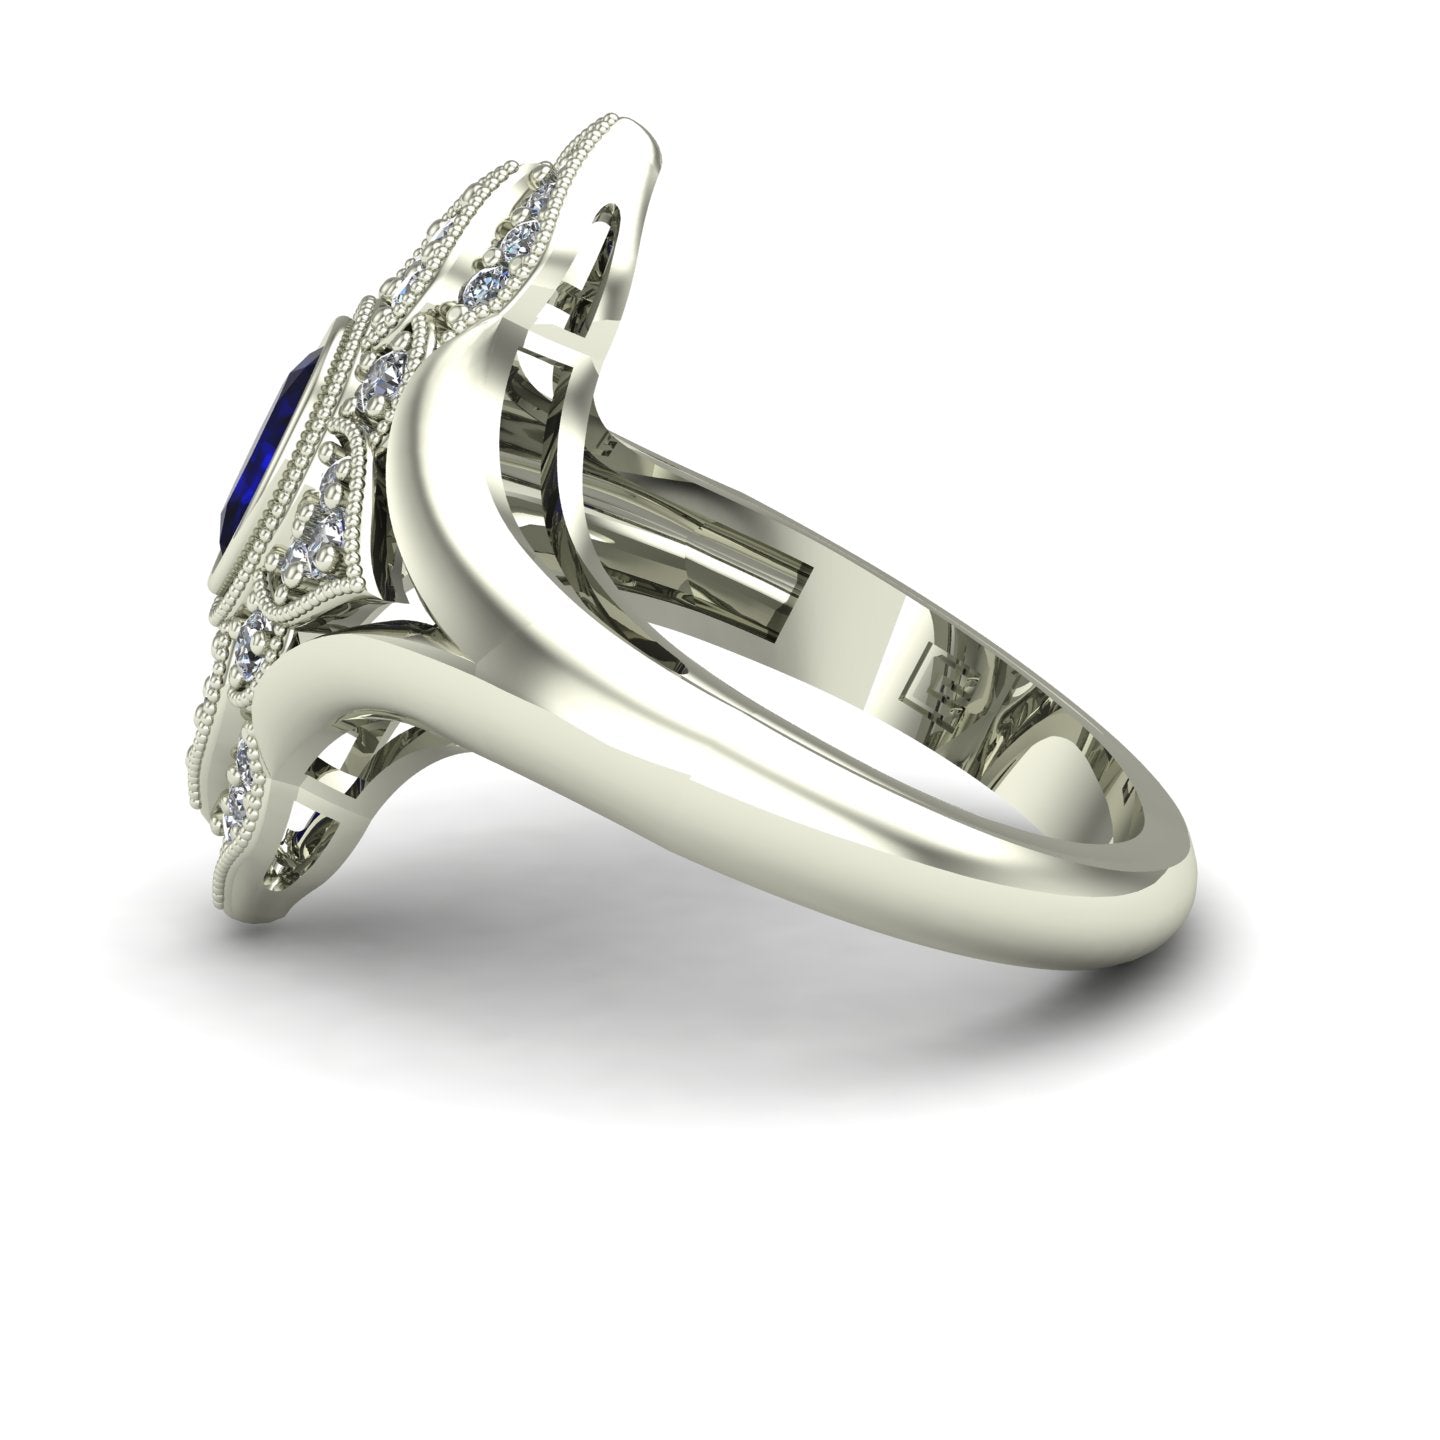 bezel set oval blue sapphire and diamond paneled ring in 14k white gold - Charles Babb Designs - side view